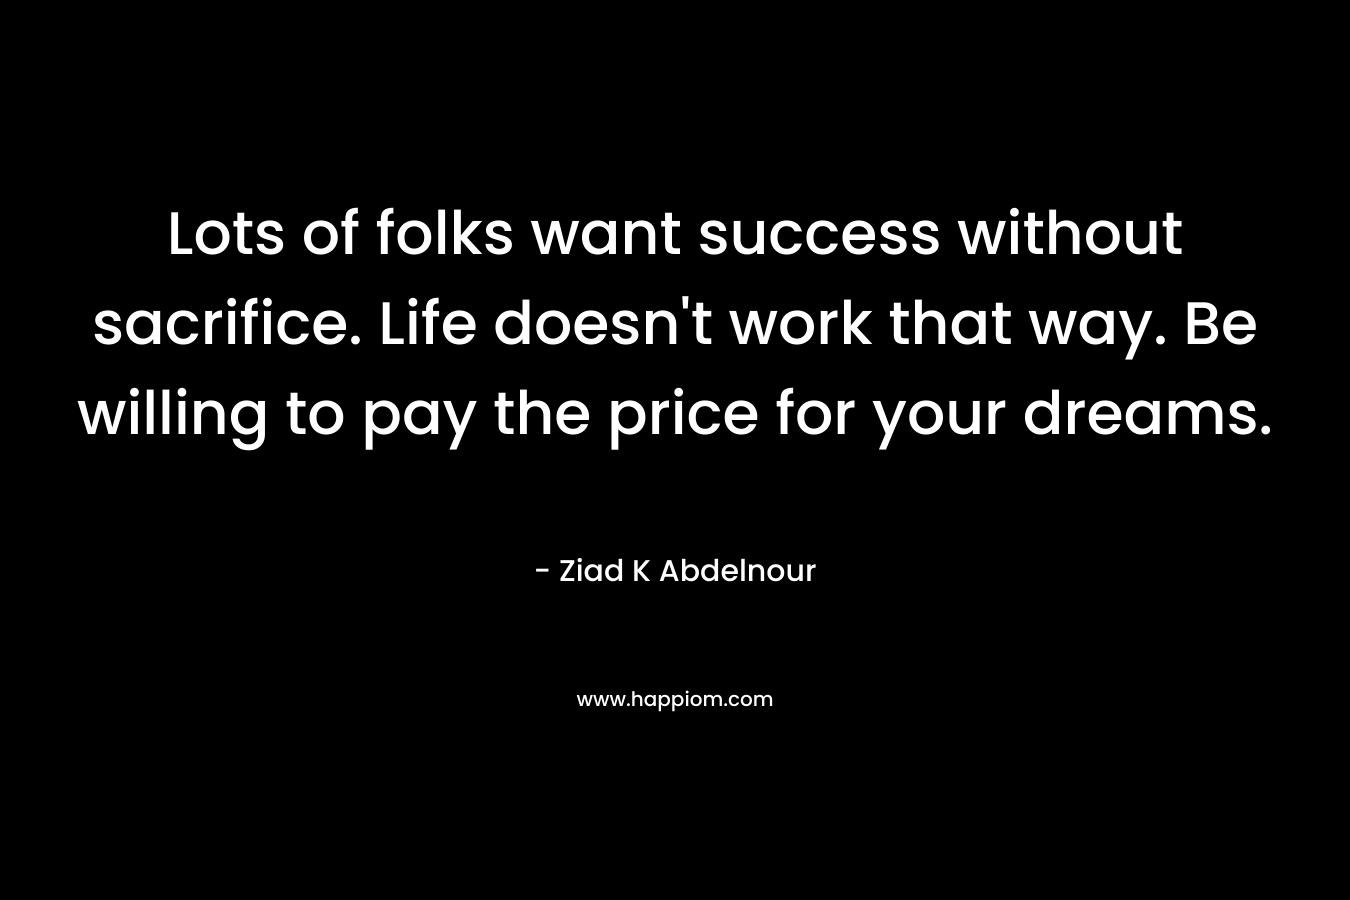 Lots of folks want success without sacrifice. Life doesn’t work that way. Be willing to pay the price for your dreams. – Ziad K Abdelnour